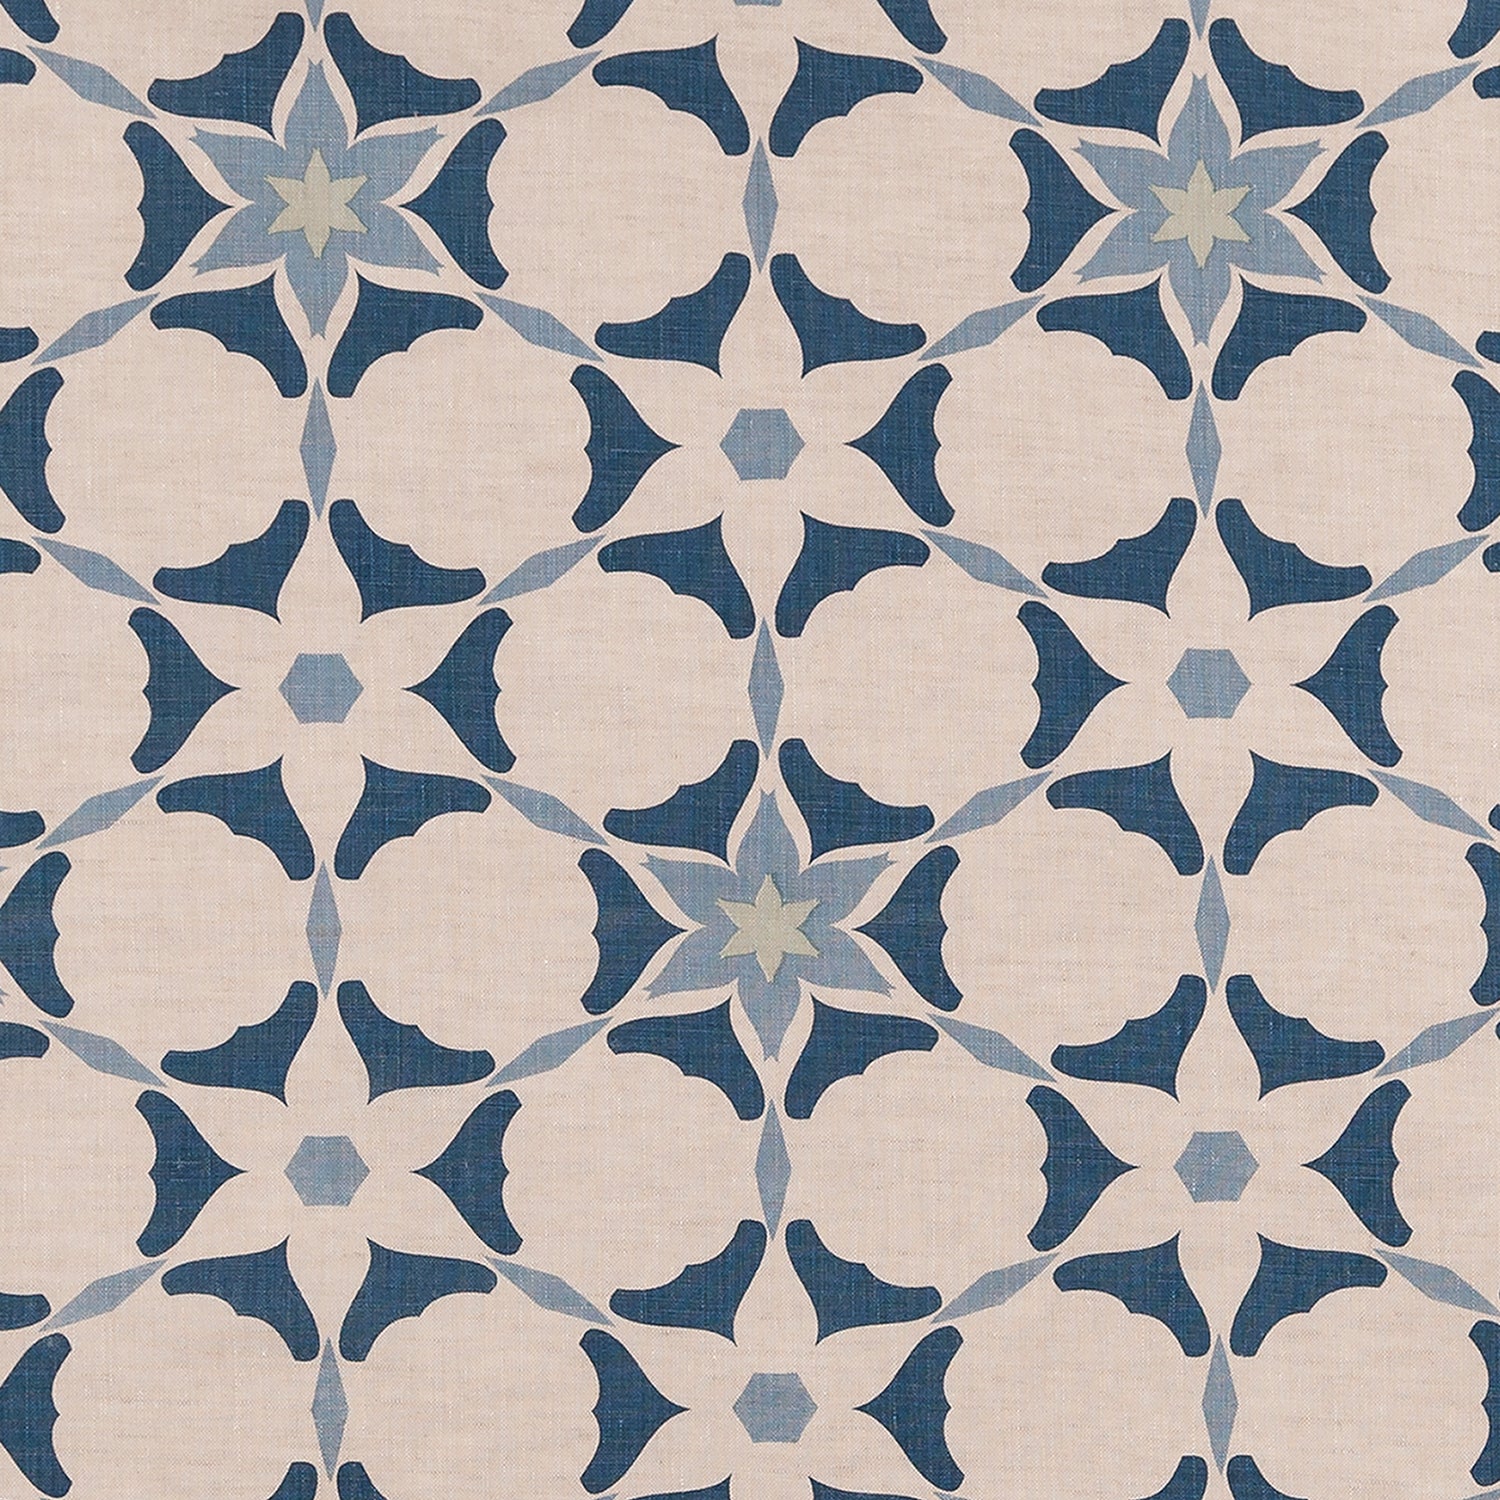 Fabric in a geometric star print in shades of blue and navy on a tan field.